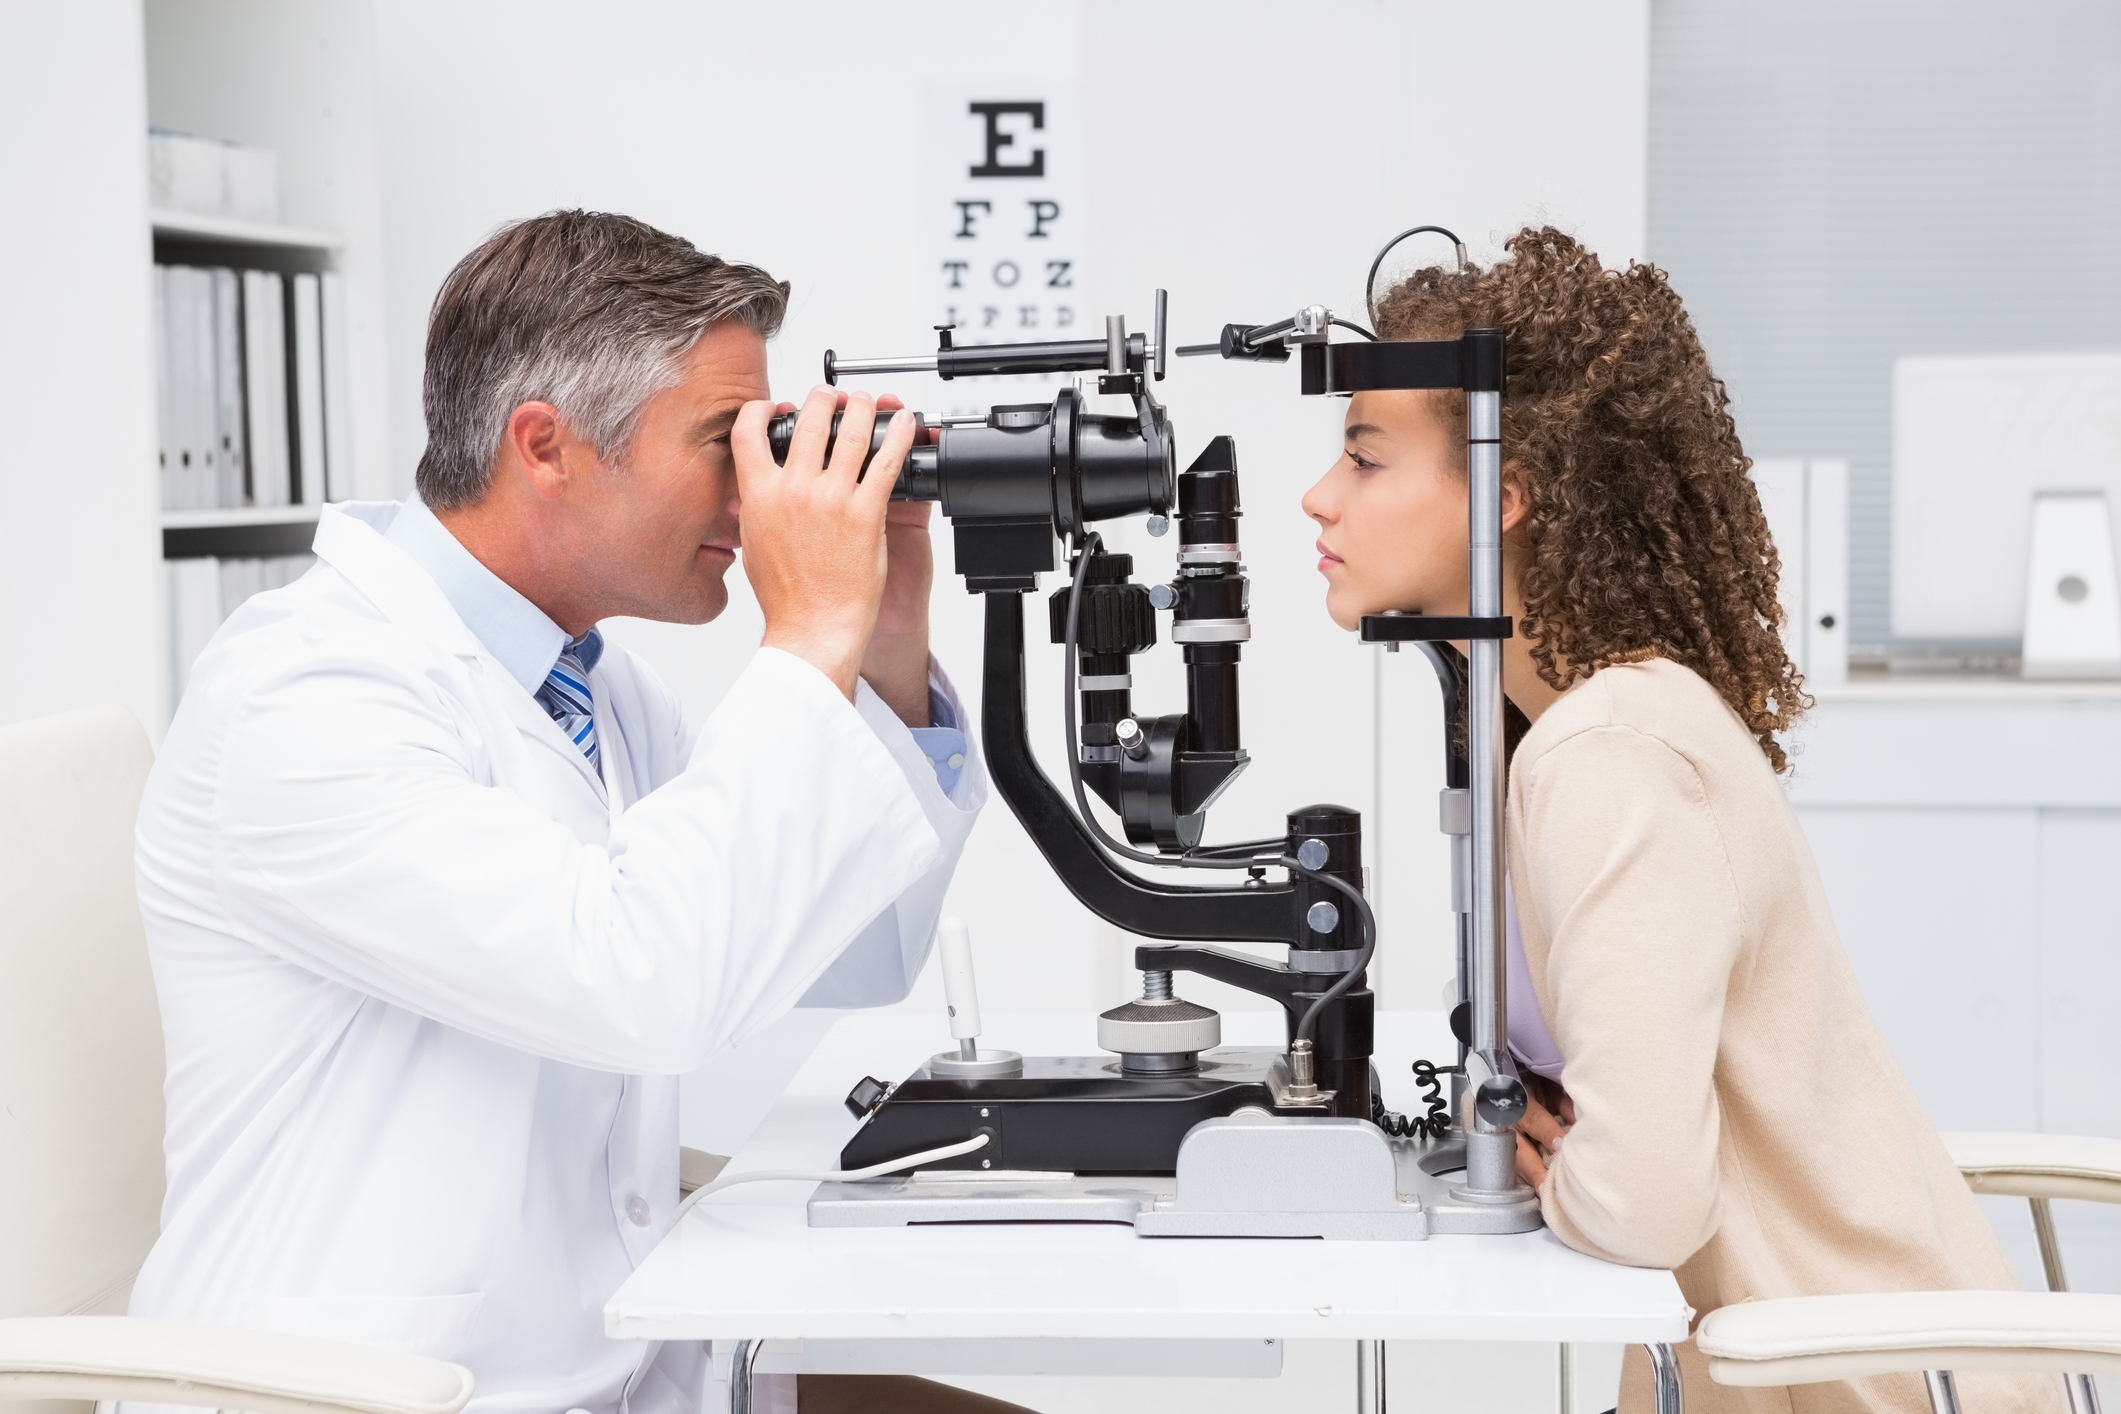 Generic photo of woman doing eye test with optometrist in medical office (Thinkstock/PA)